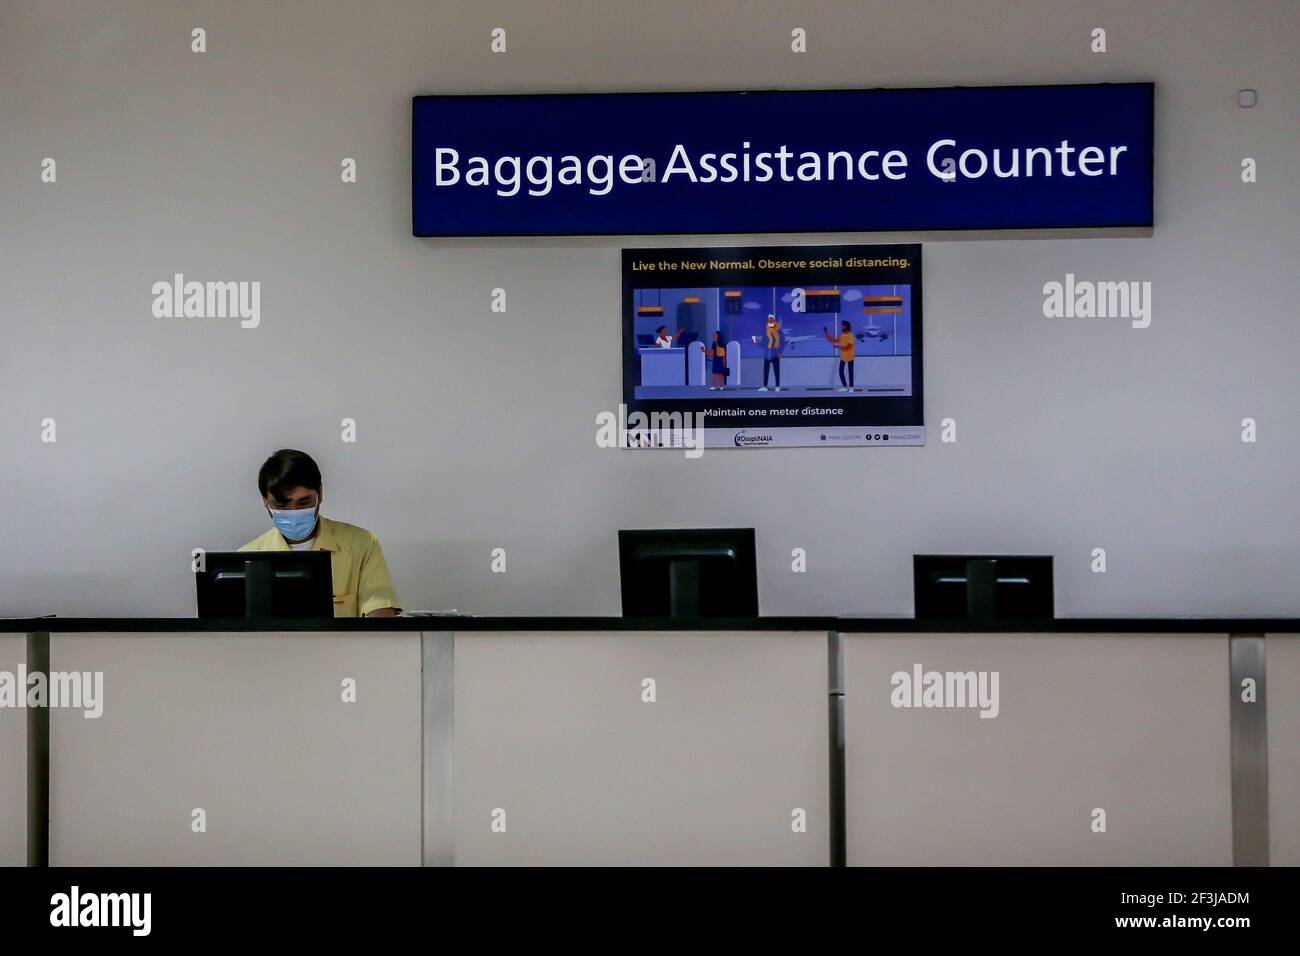 (210317) -- MANILA, March 17, 2021 (Xinhua) -- An airport employee wearing a protective mask works behind a baggage assistance counter inside the Terminal 1 of the Ninoy Aquino International Airport in Manila, the Philippines on March 17, 2021. The Philippines said it will temporarily suspend the entry of foreigners and some citizens as the Southeast Asian country battles a renewed spike in COVID-19 cases. In a statement issued on Tuesday night, the country's coronavirus task force said foreign citizens and returning nationals who had not been working overseas will not be able to enter the co Stock Photo